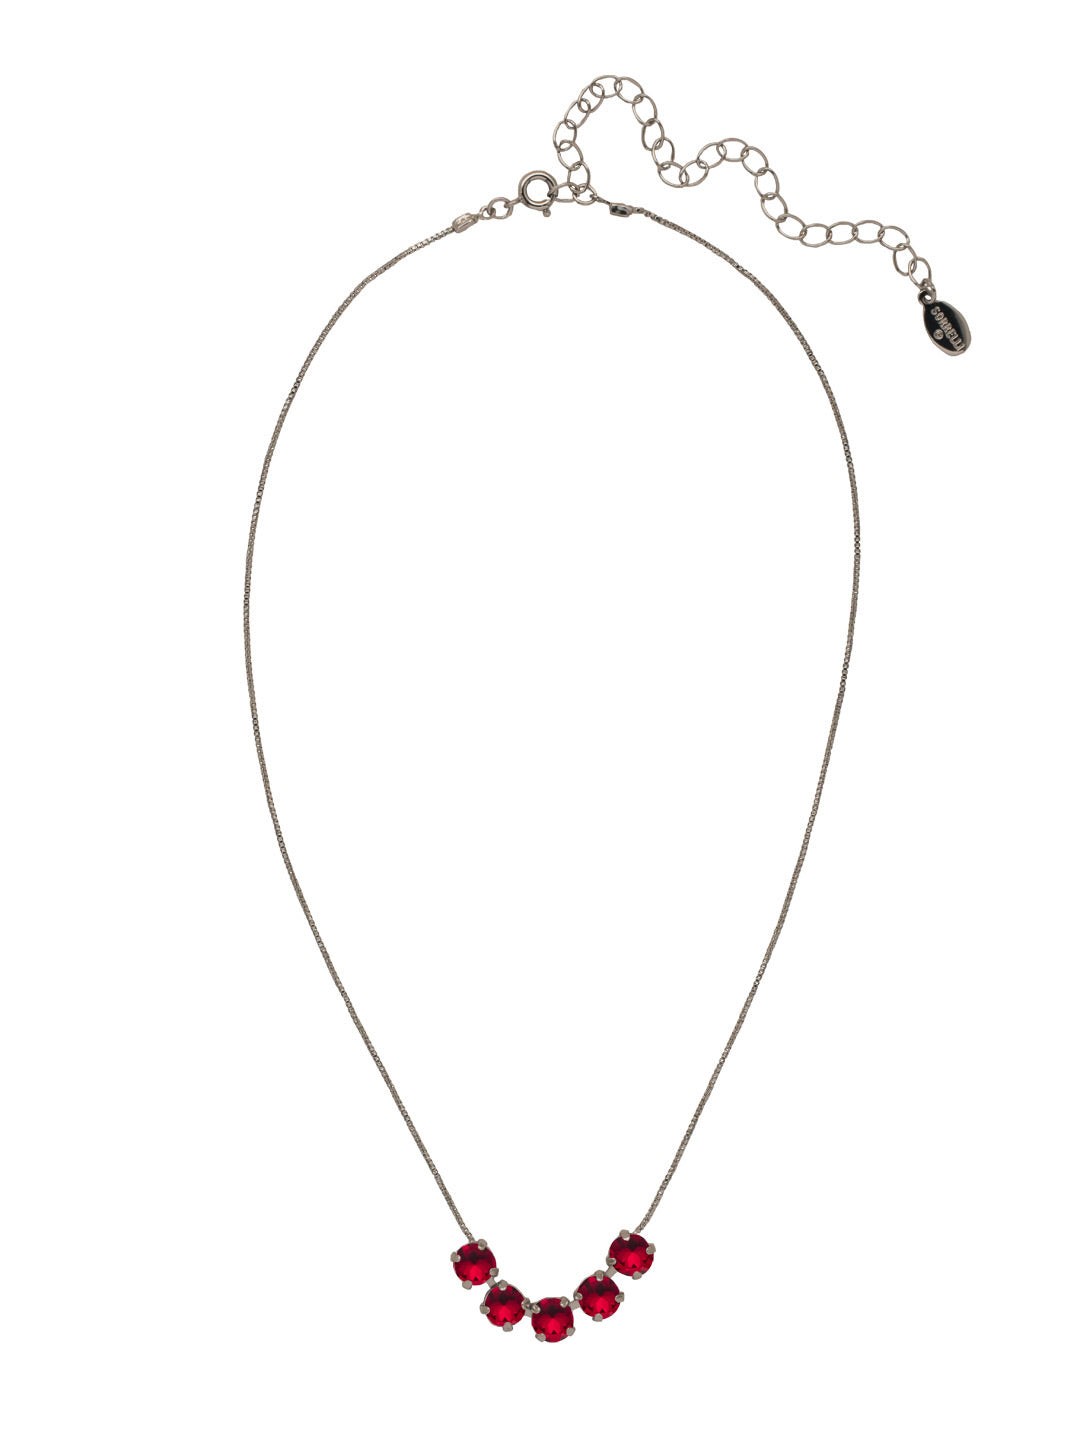 Shaughna Tennis Necklace - NFC84ASSI - <p>The Shaughna Tennis Necklace features five crystals on a delicate adjustable chain. From Sorrelli's Siam collection in our Antique Silver-tone finish.</p>